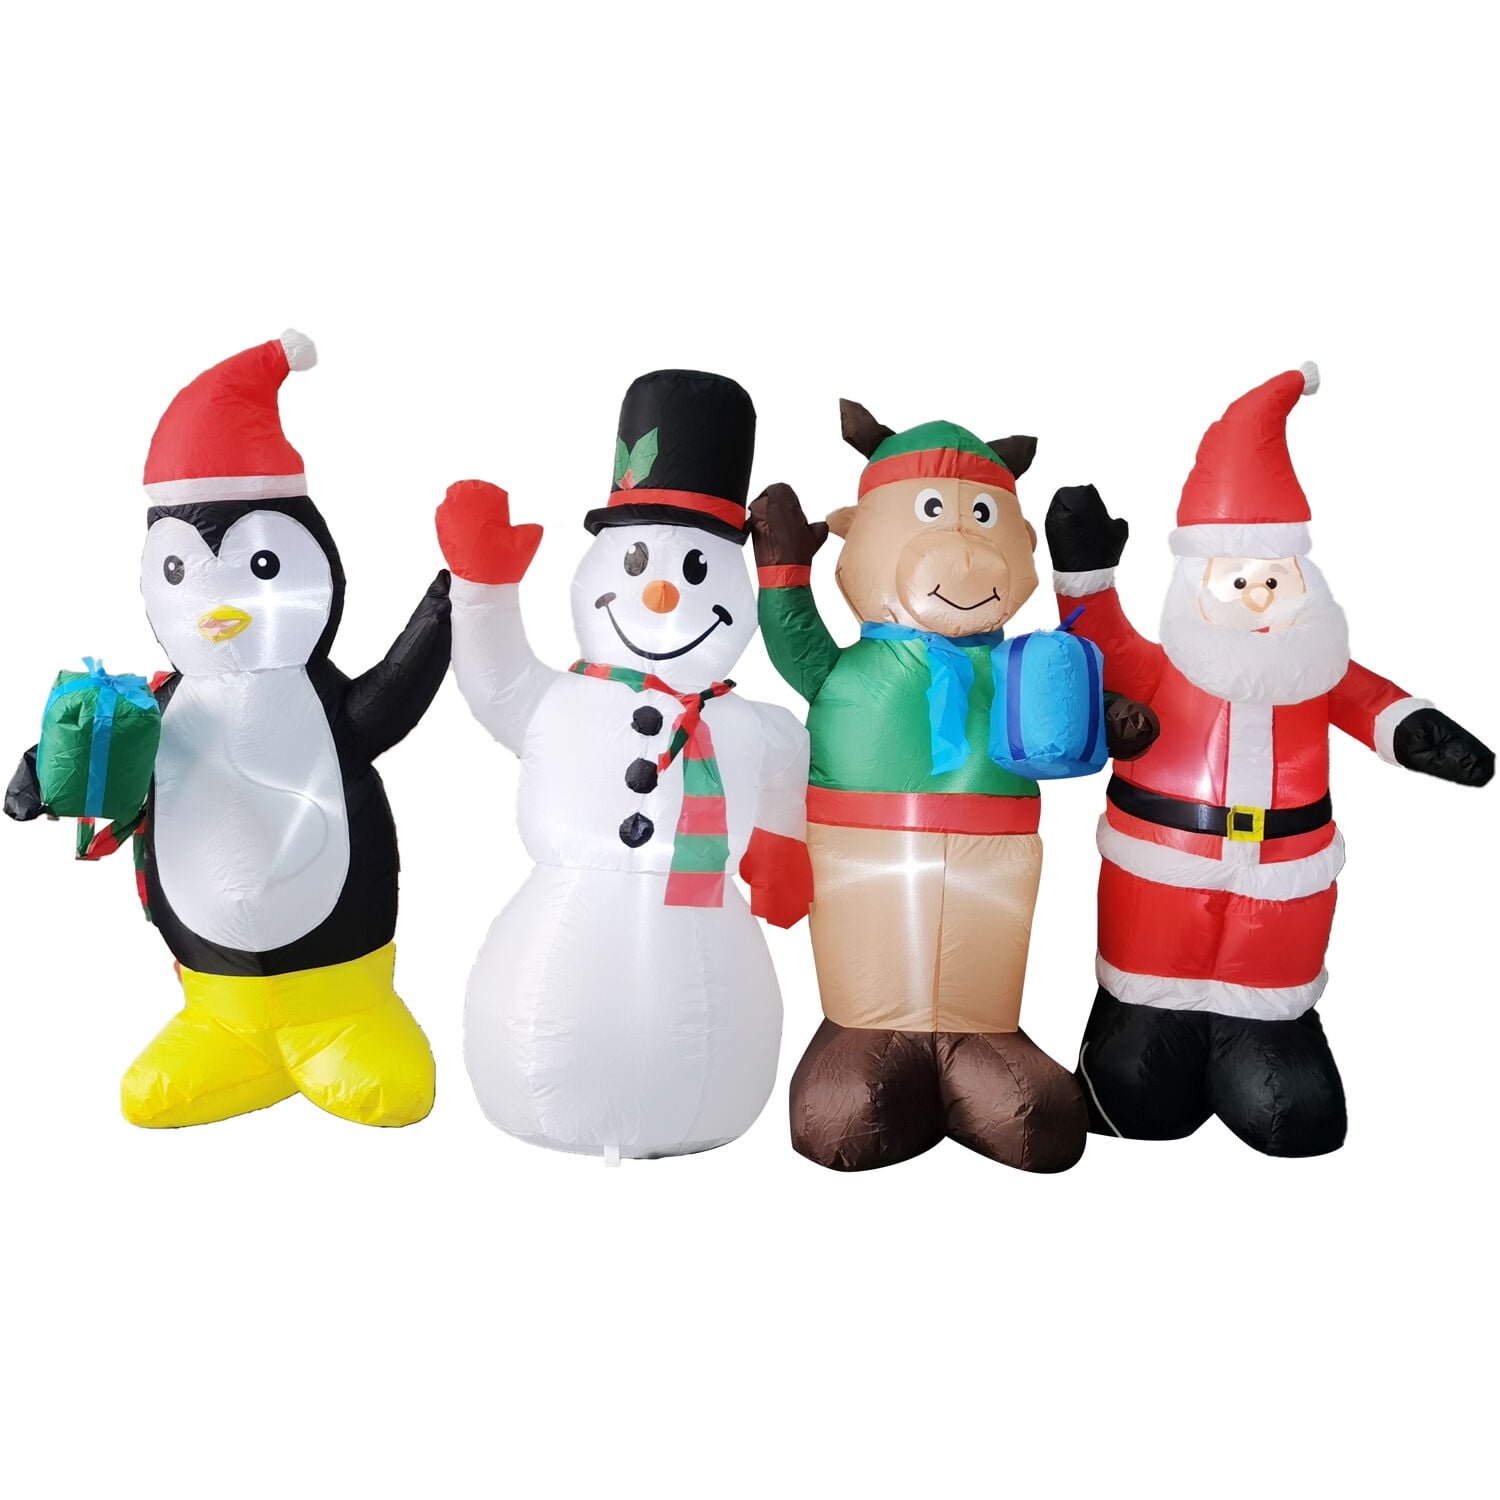  48PCS Christmas Reusable Drinking Straws, Snowman Penguin  Reindeer Jingle Bell Gingerbread Man Pattern Party Favors Goodie Gifts for  Kids Holiday Party Supplies : Toys & Games